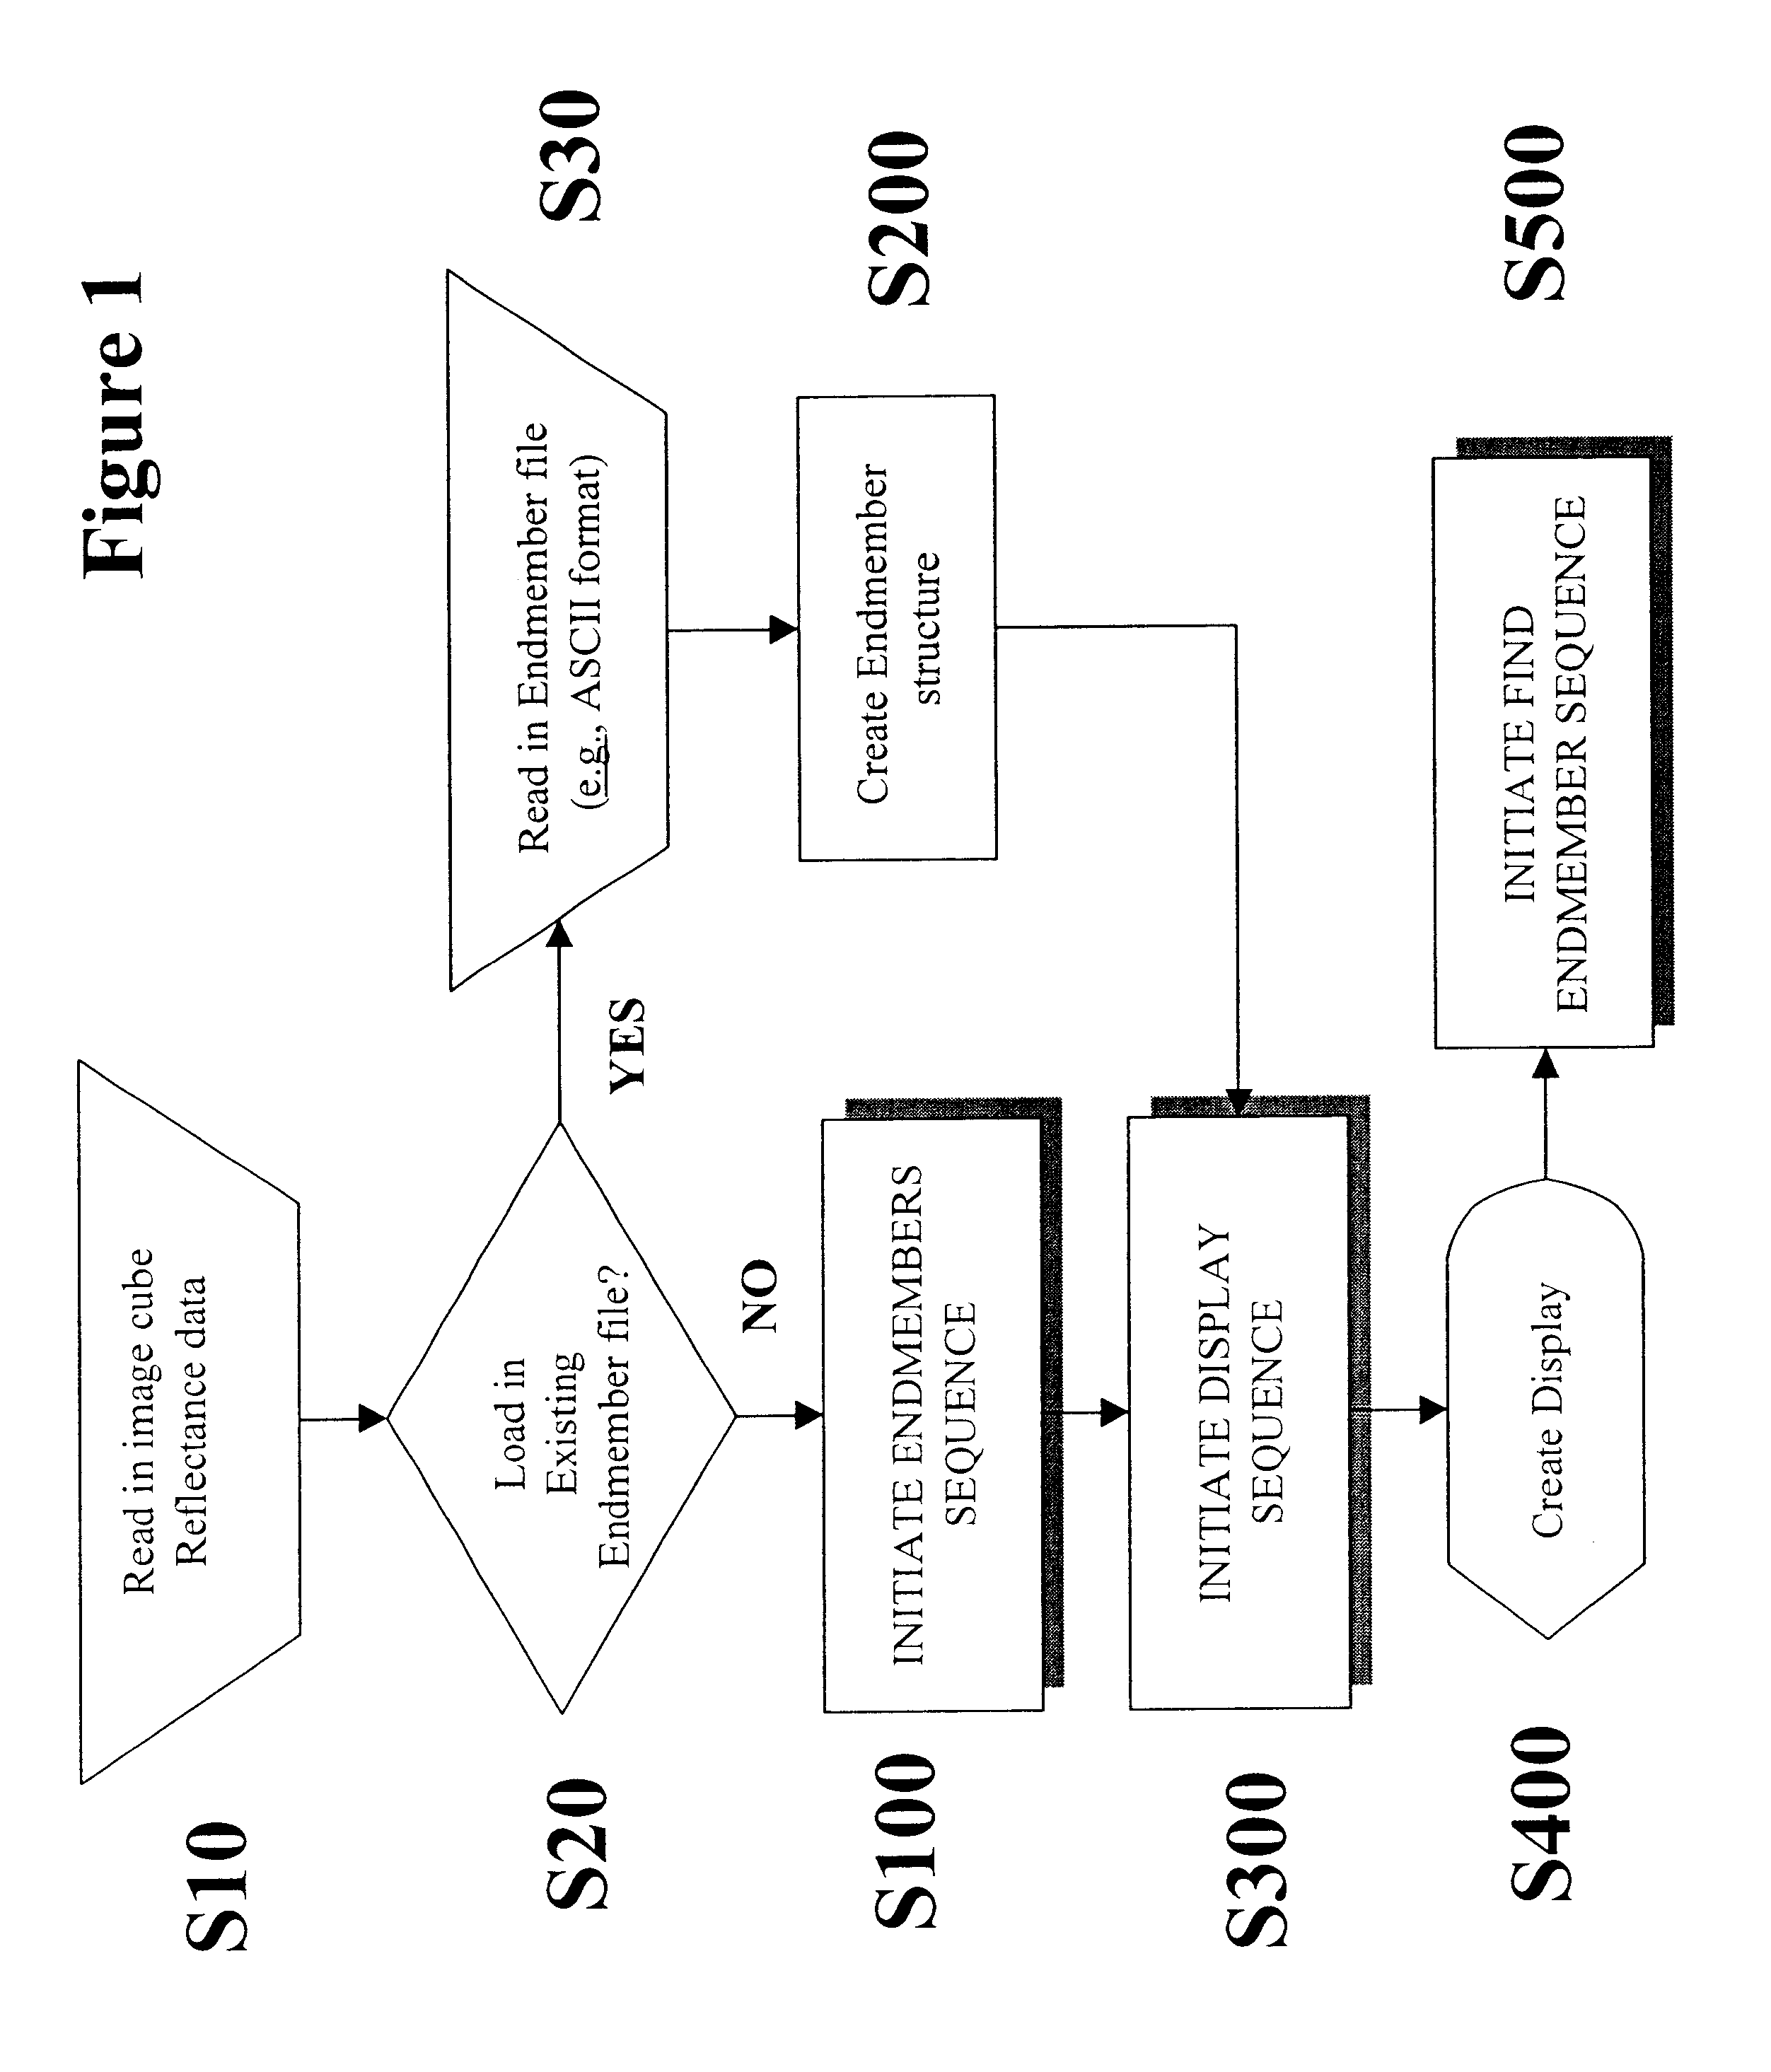 Method for selecting representative endmember components from spectral data